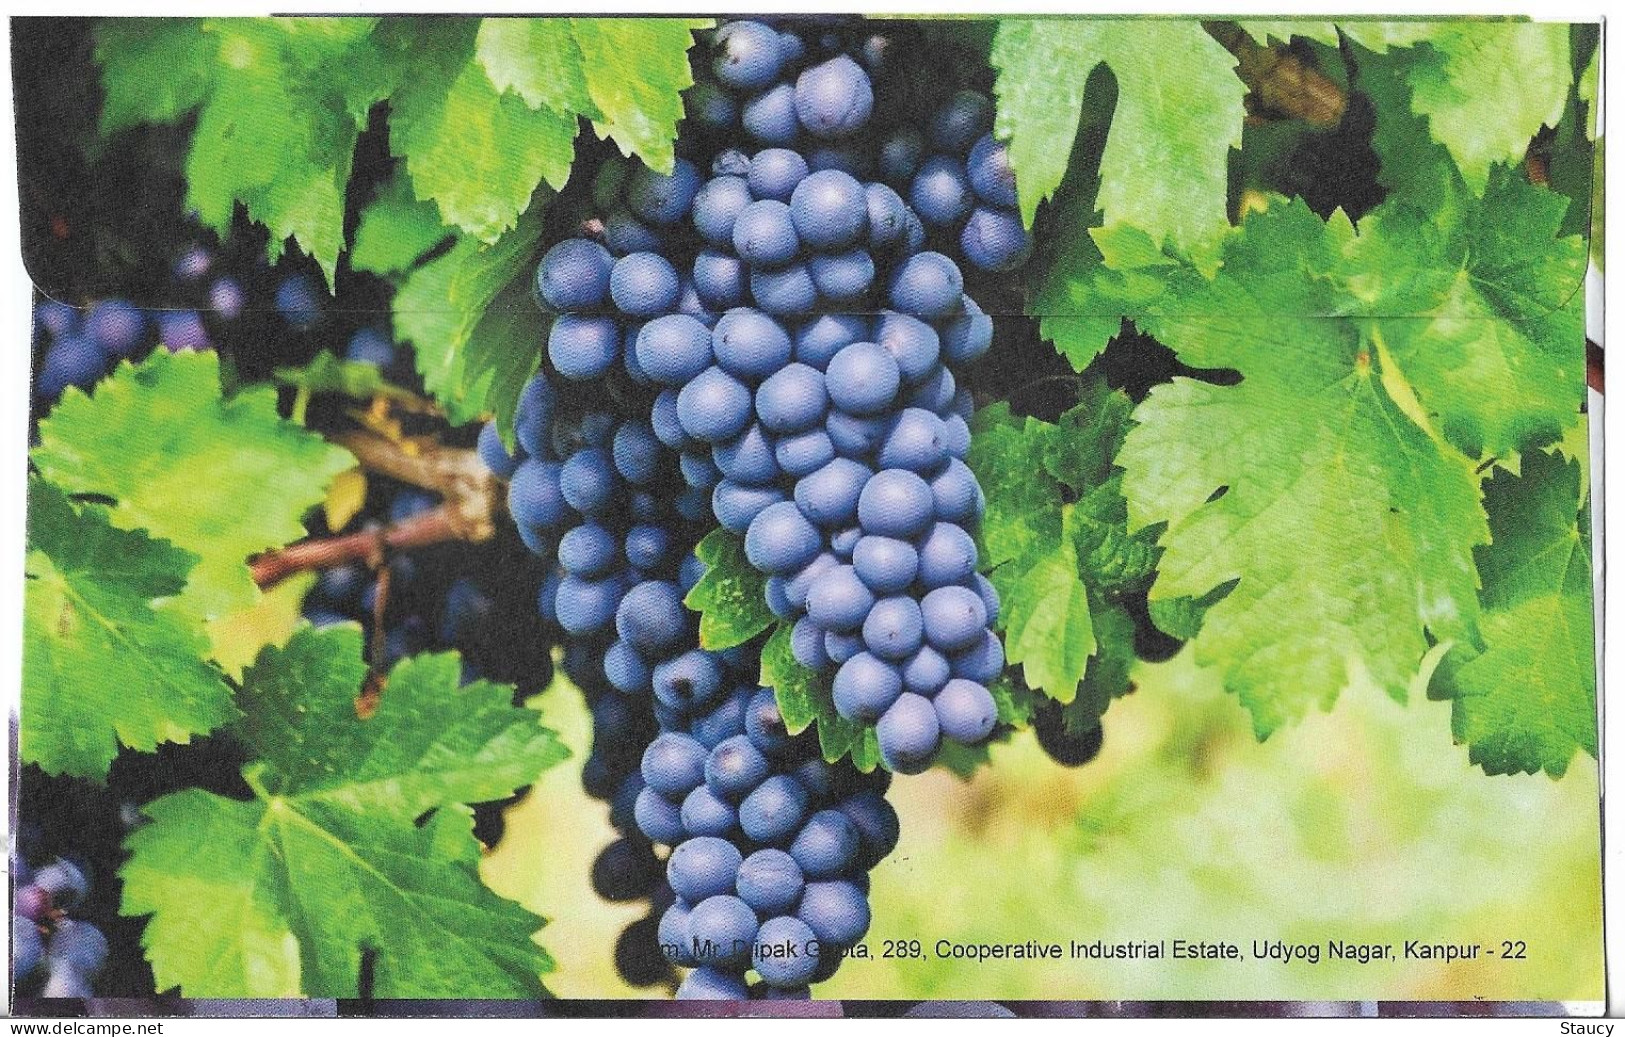 India 2023 GI Geological Indications: Agricultural Goods - Bangalore Blue Grapes, Special FDC Kanpur Cancelled As Scan - Agriculture